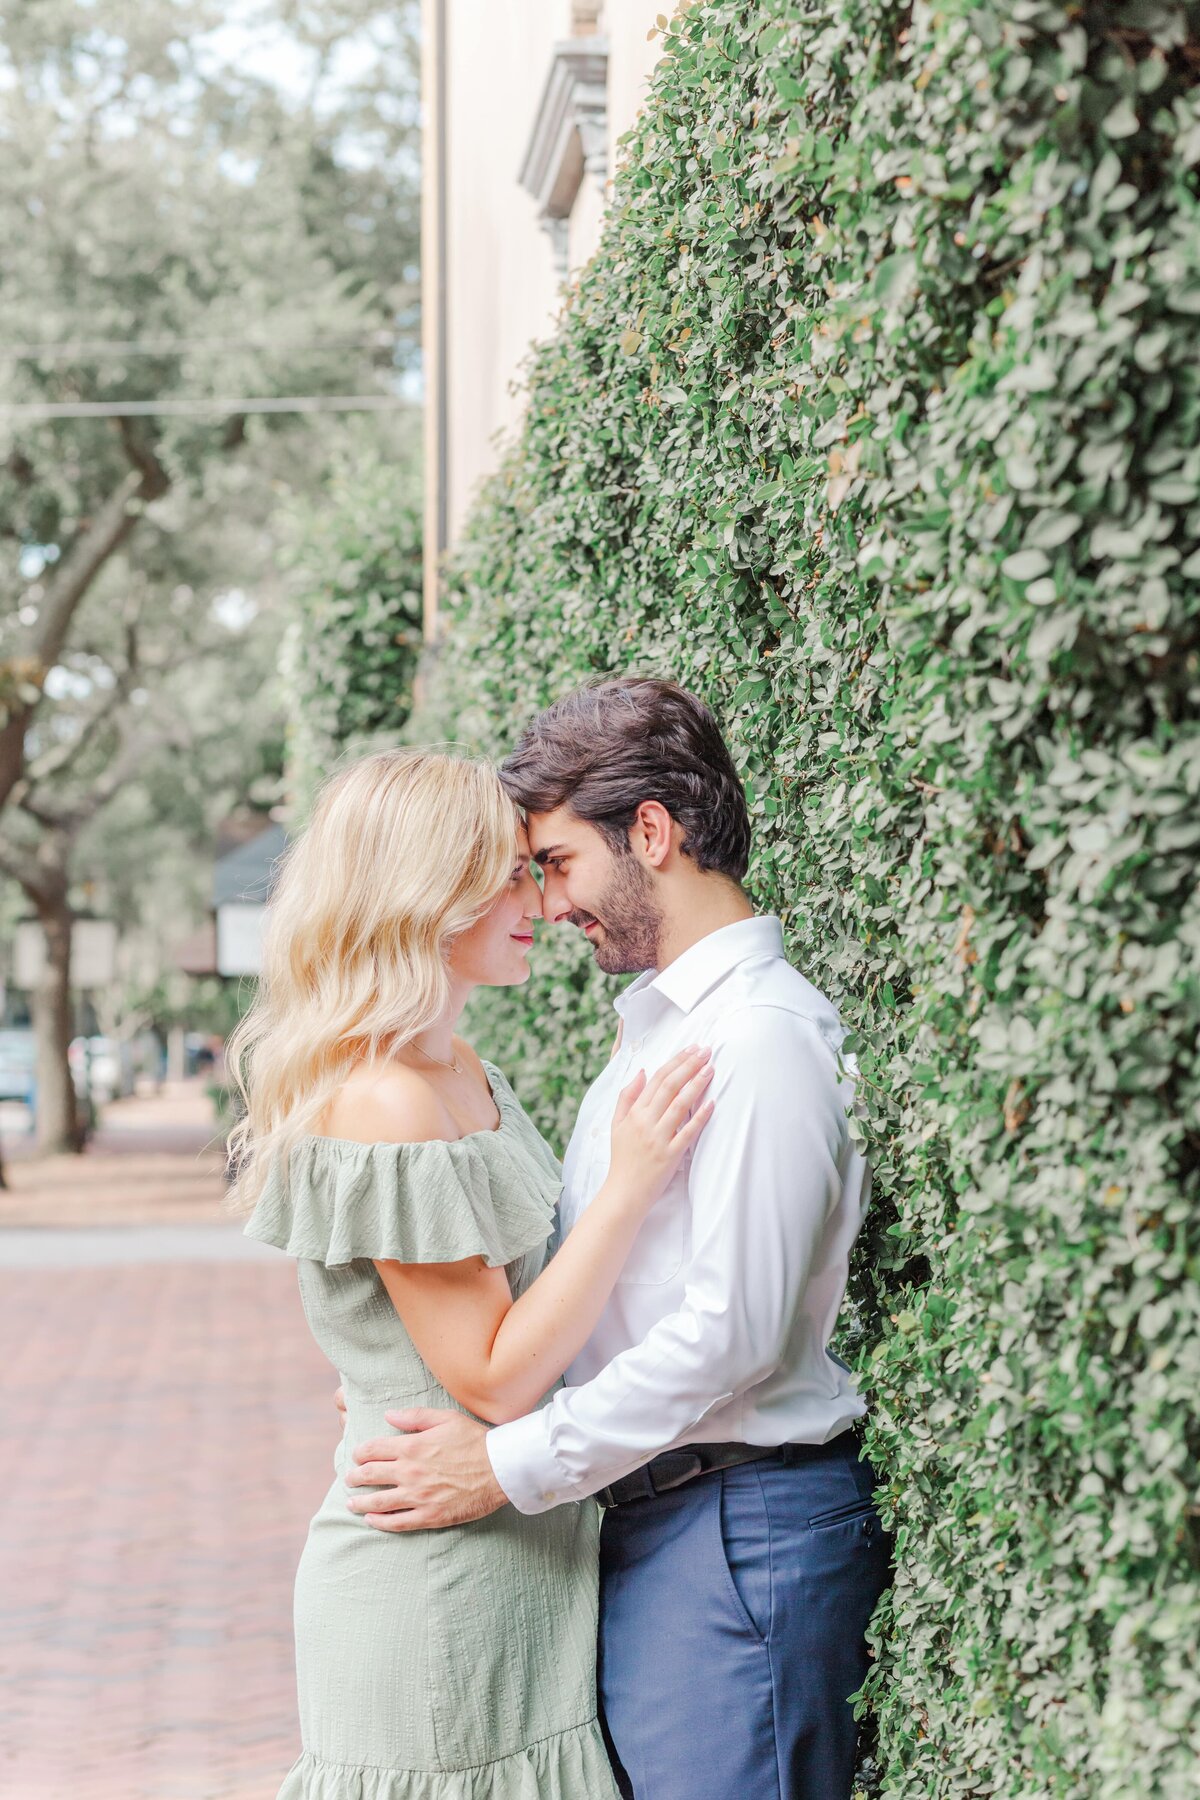 a young engaged couple embrace each other against a wall of ivy on the street.